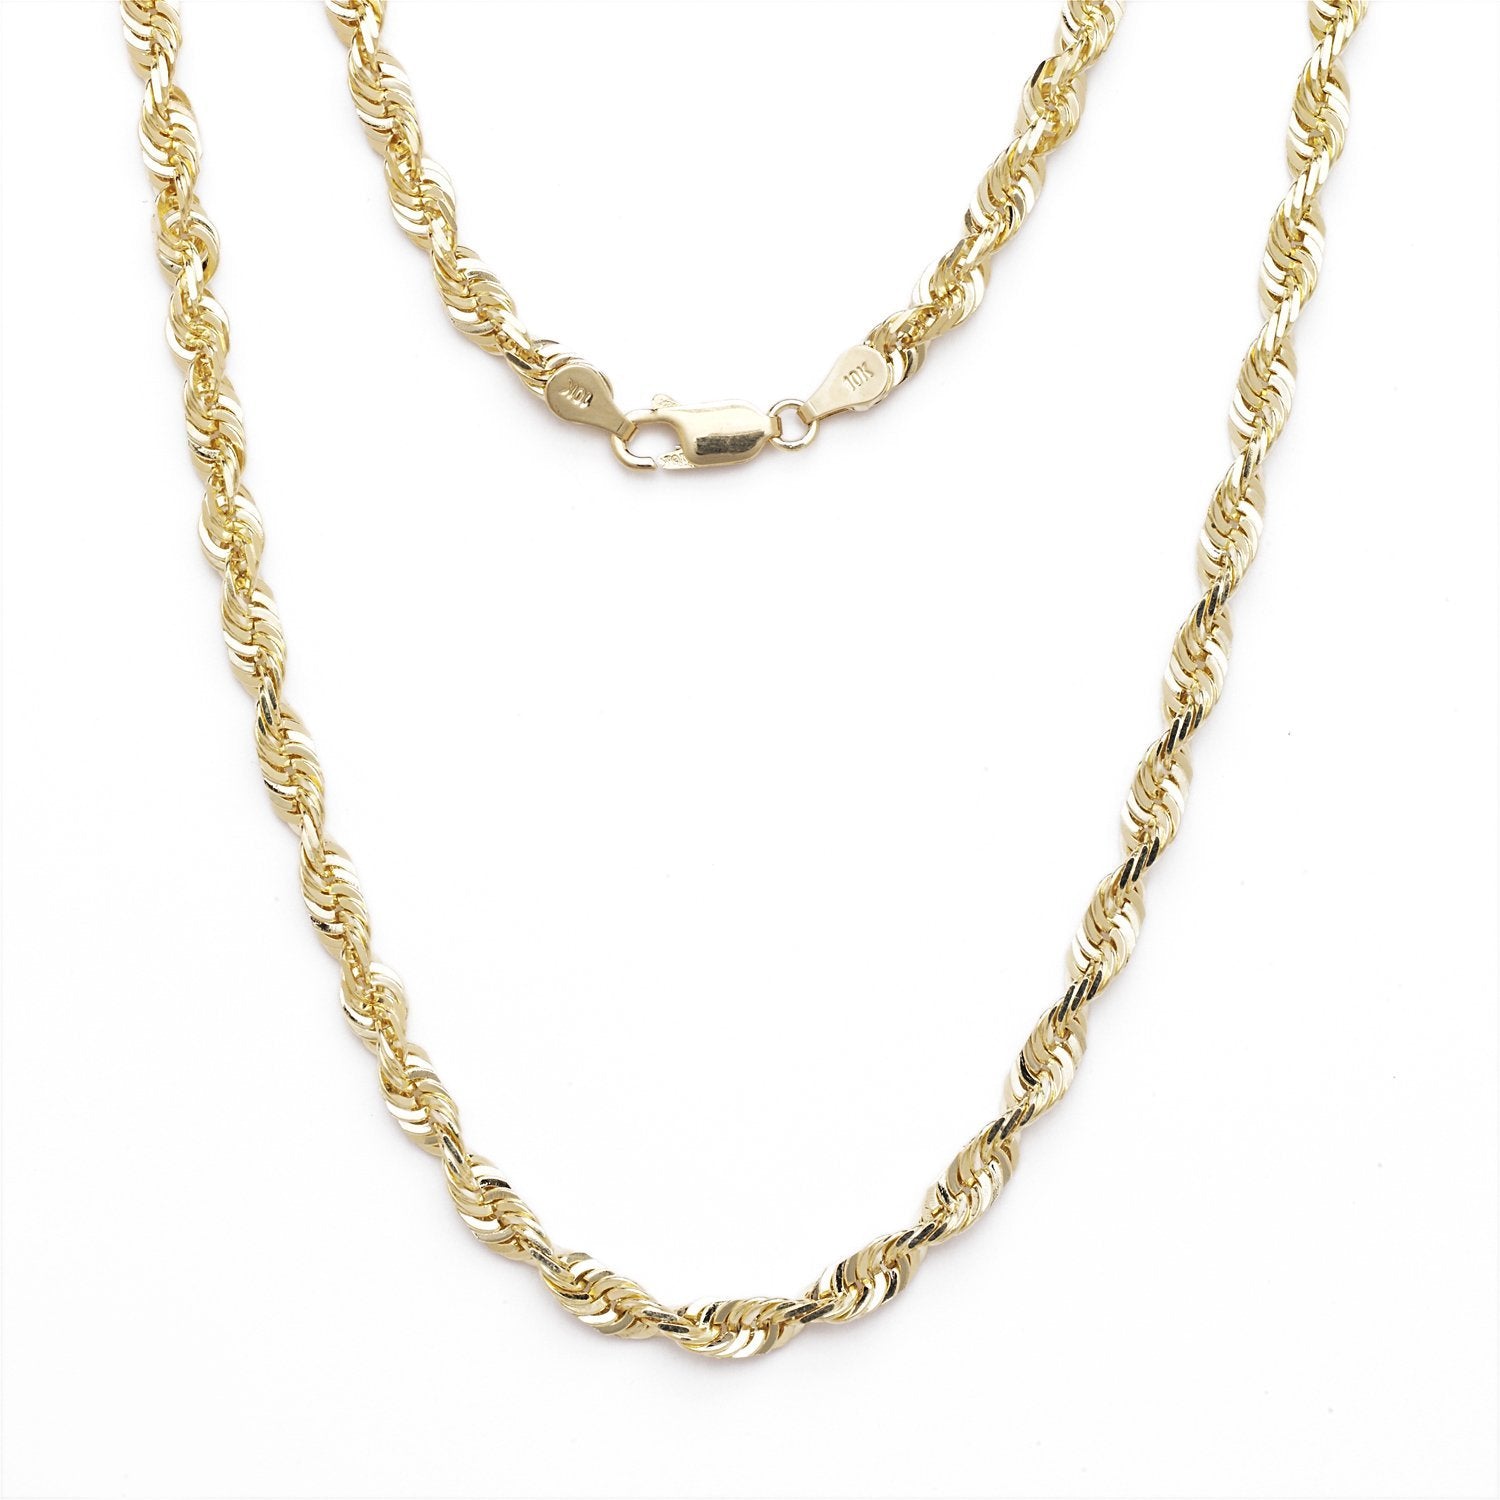 10k Yellow Gold Solid Extra Light Diamond Cut Rope Chain Necklace, 2.25mm